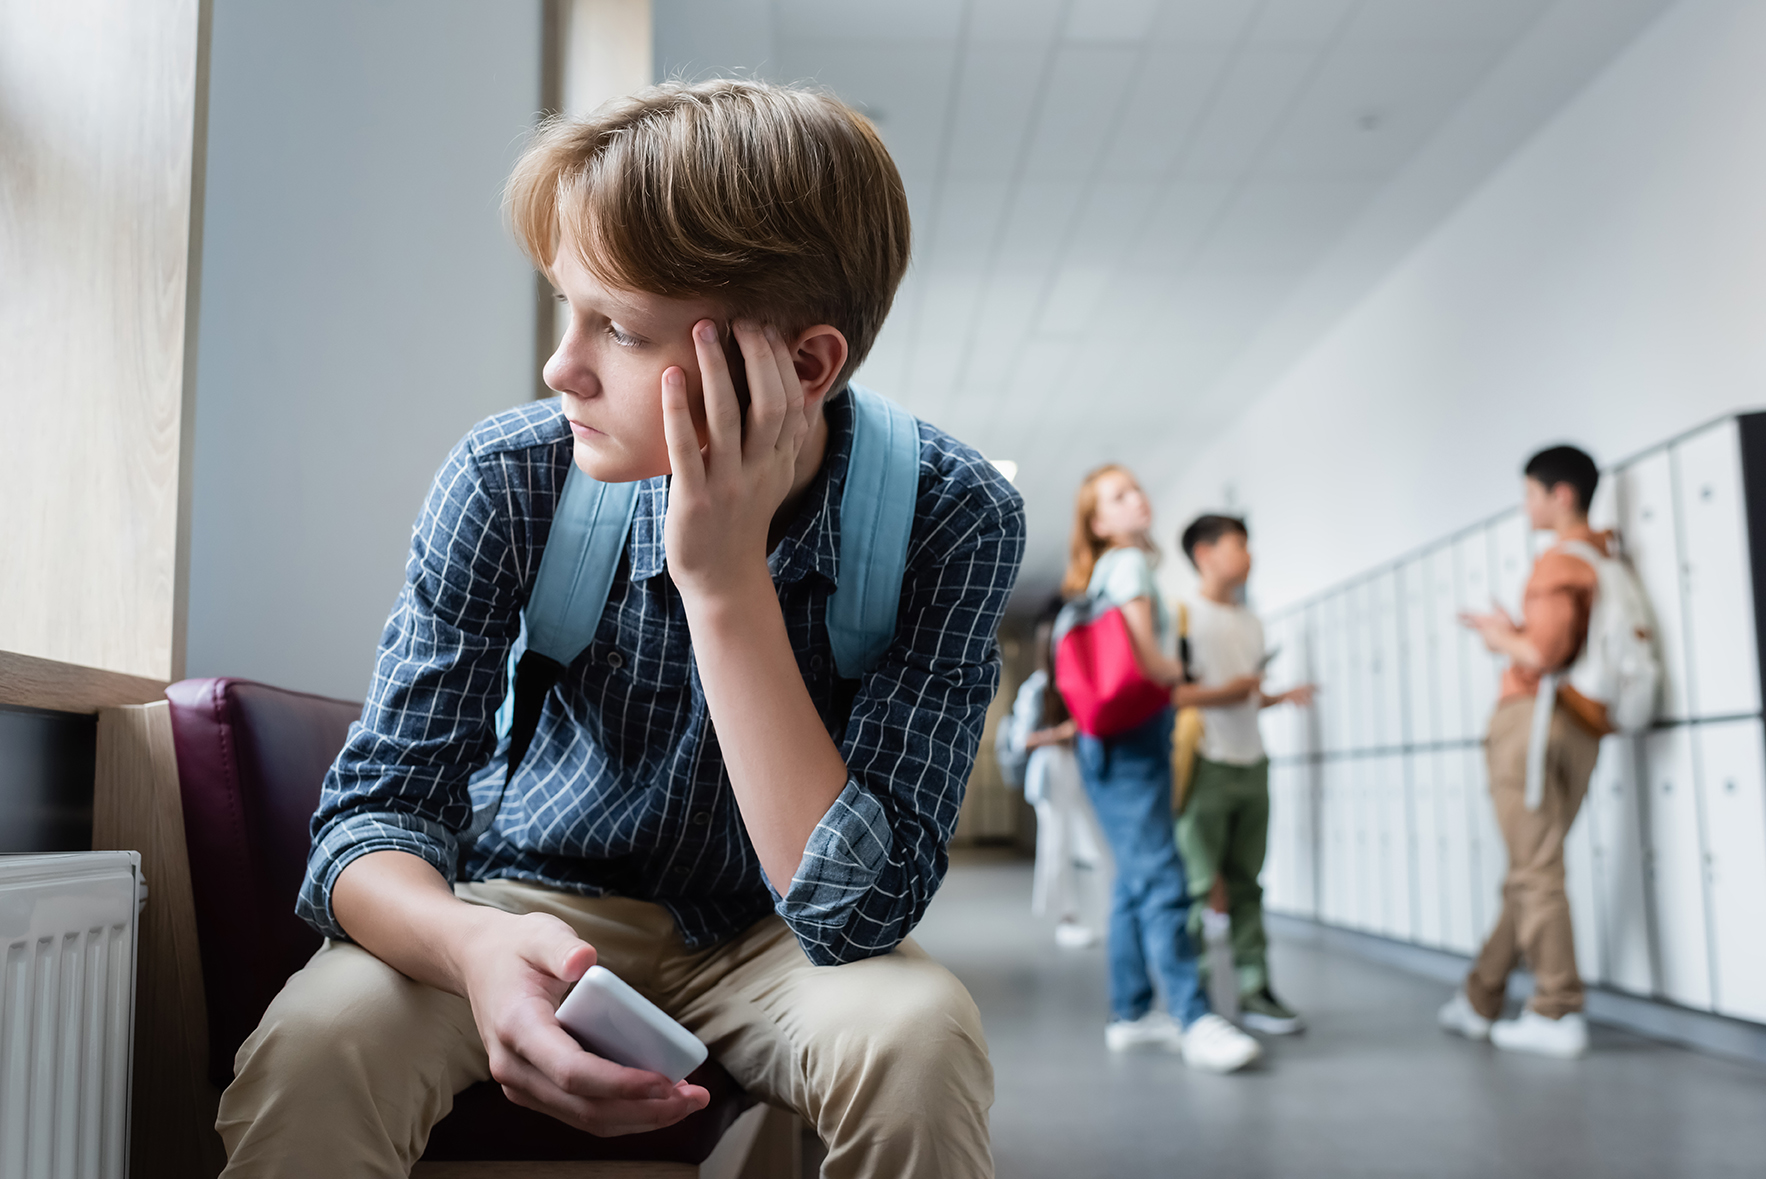 photo of boy sitting in school hallway looking glumly out window while group of schoolmates talks in the background